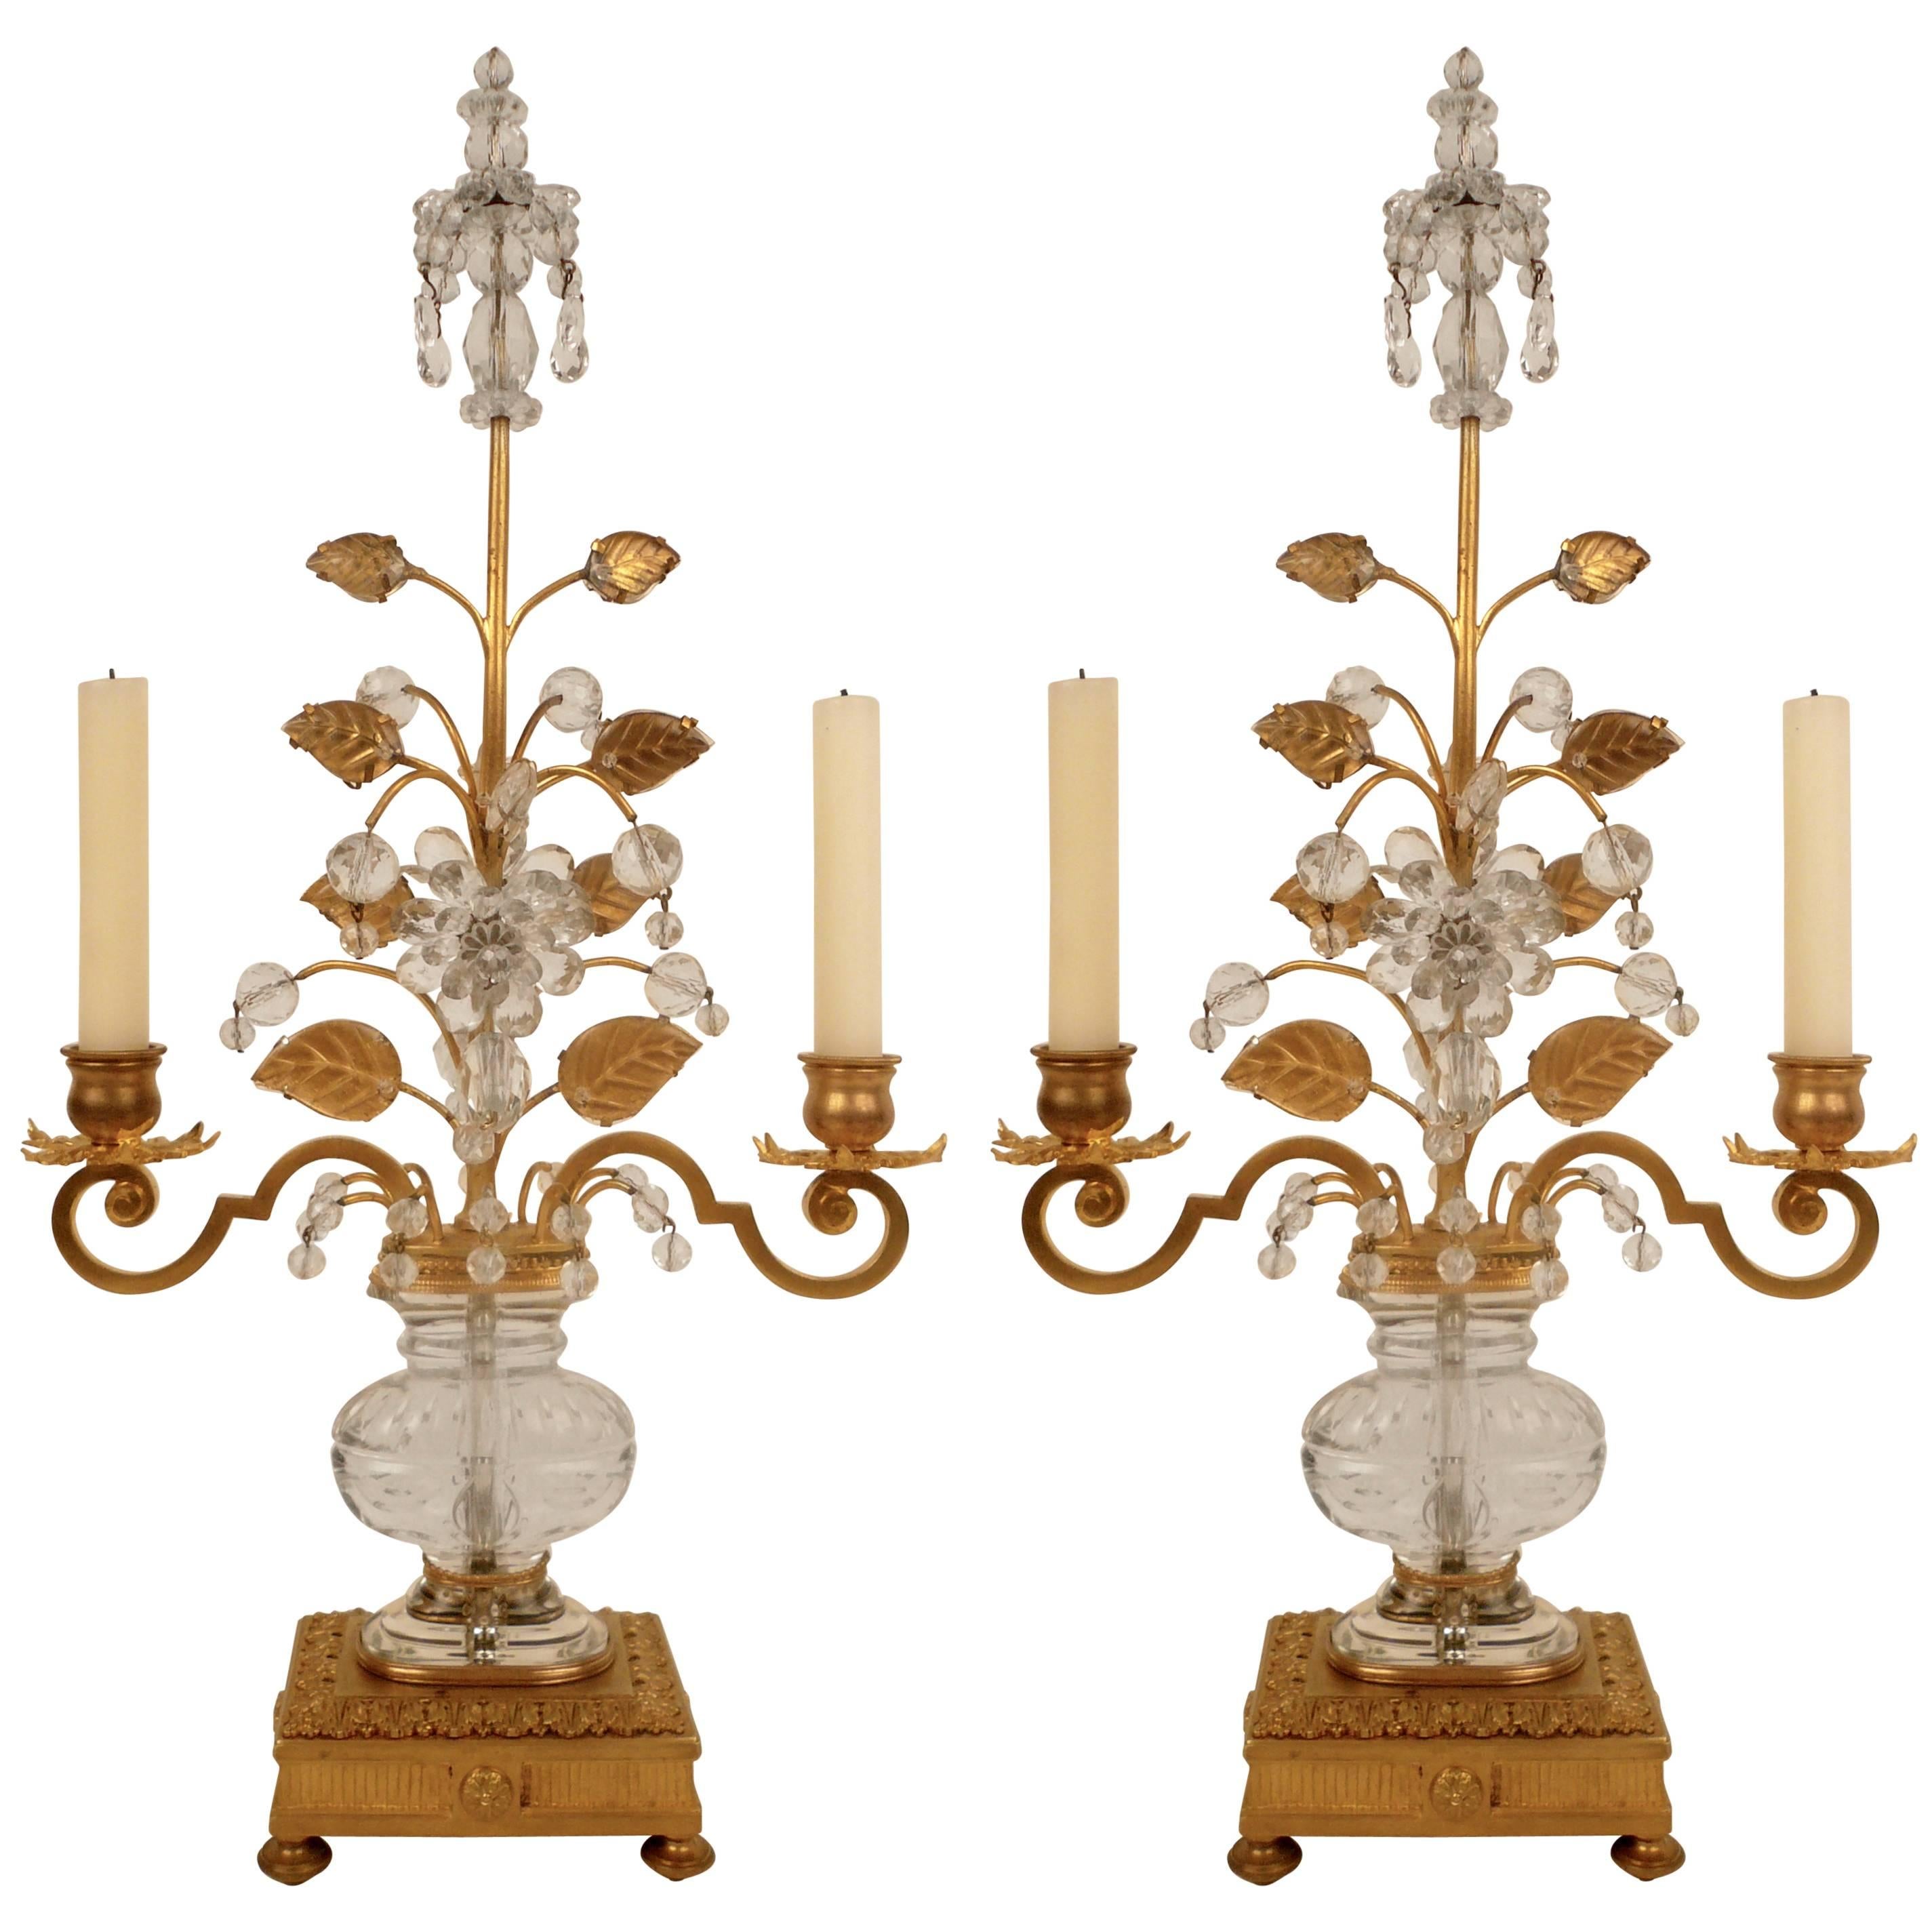 Pair of French Gilt Bronze and Rock Crystal Candelabra by Maison Baguès